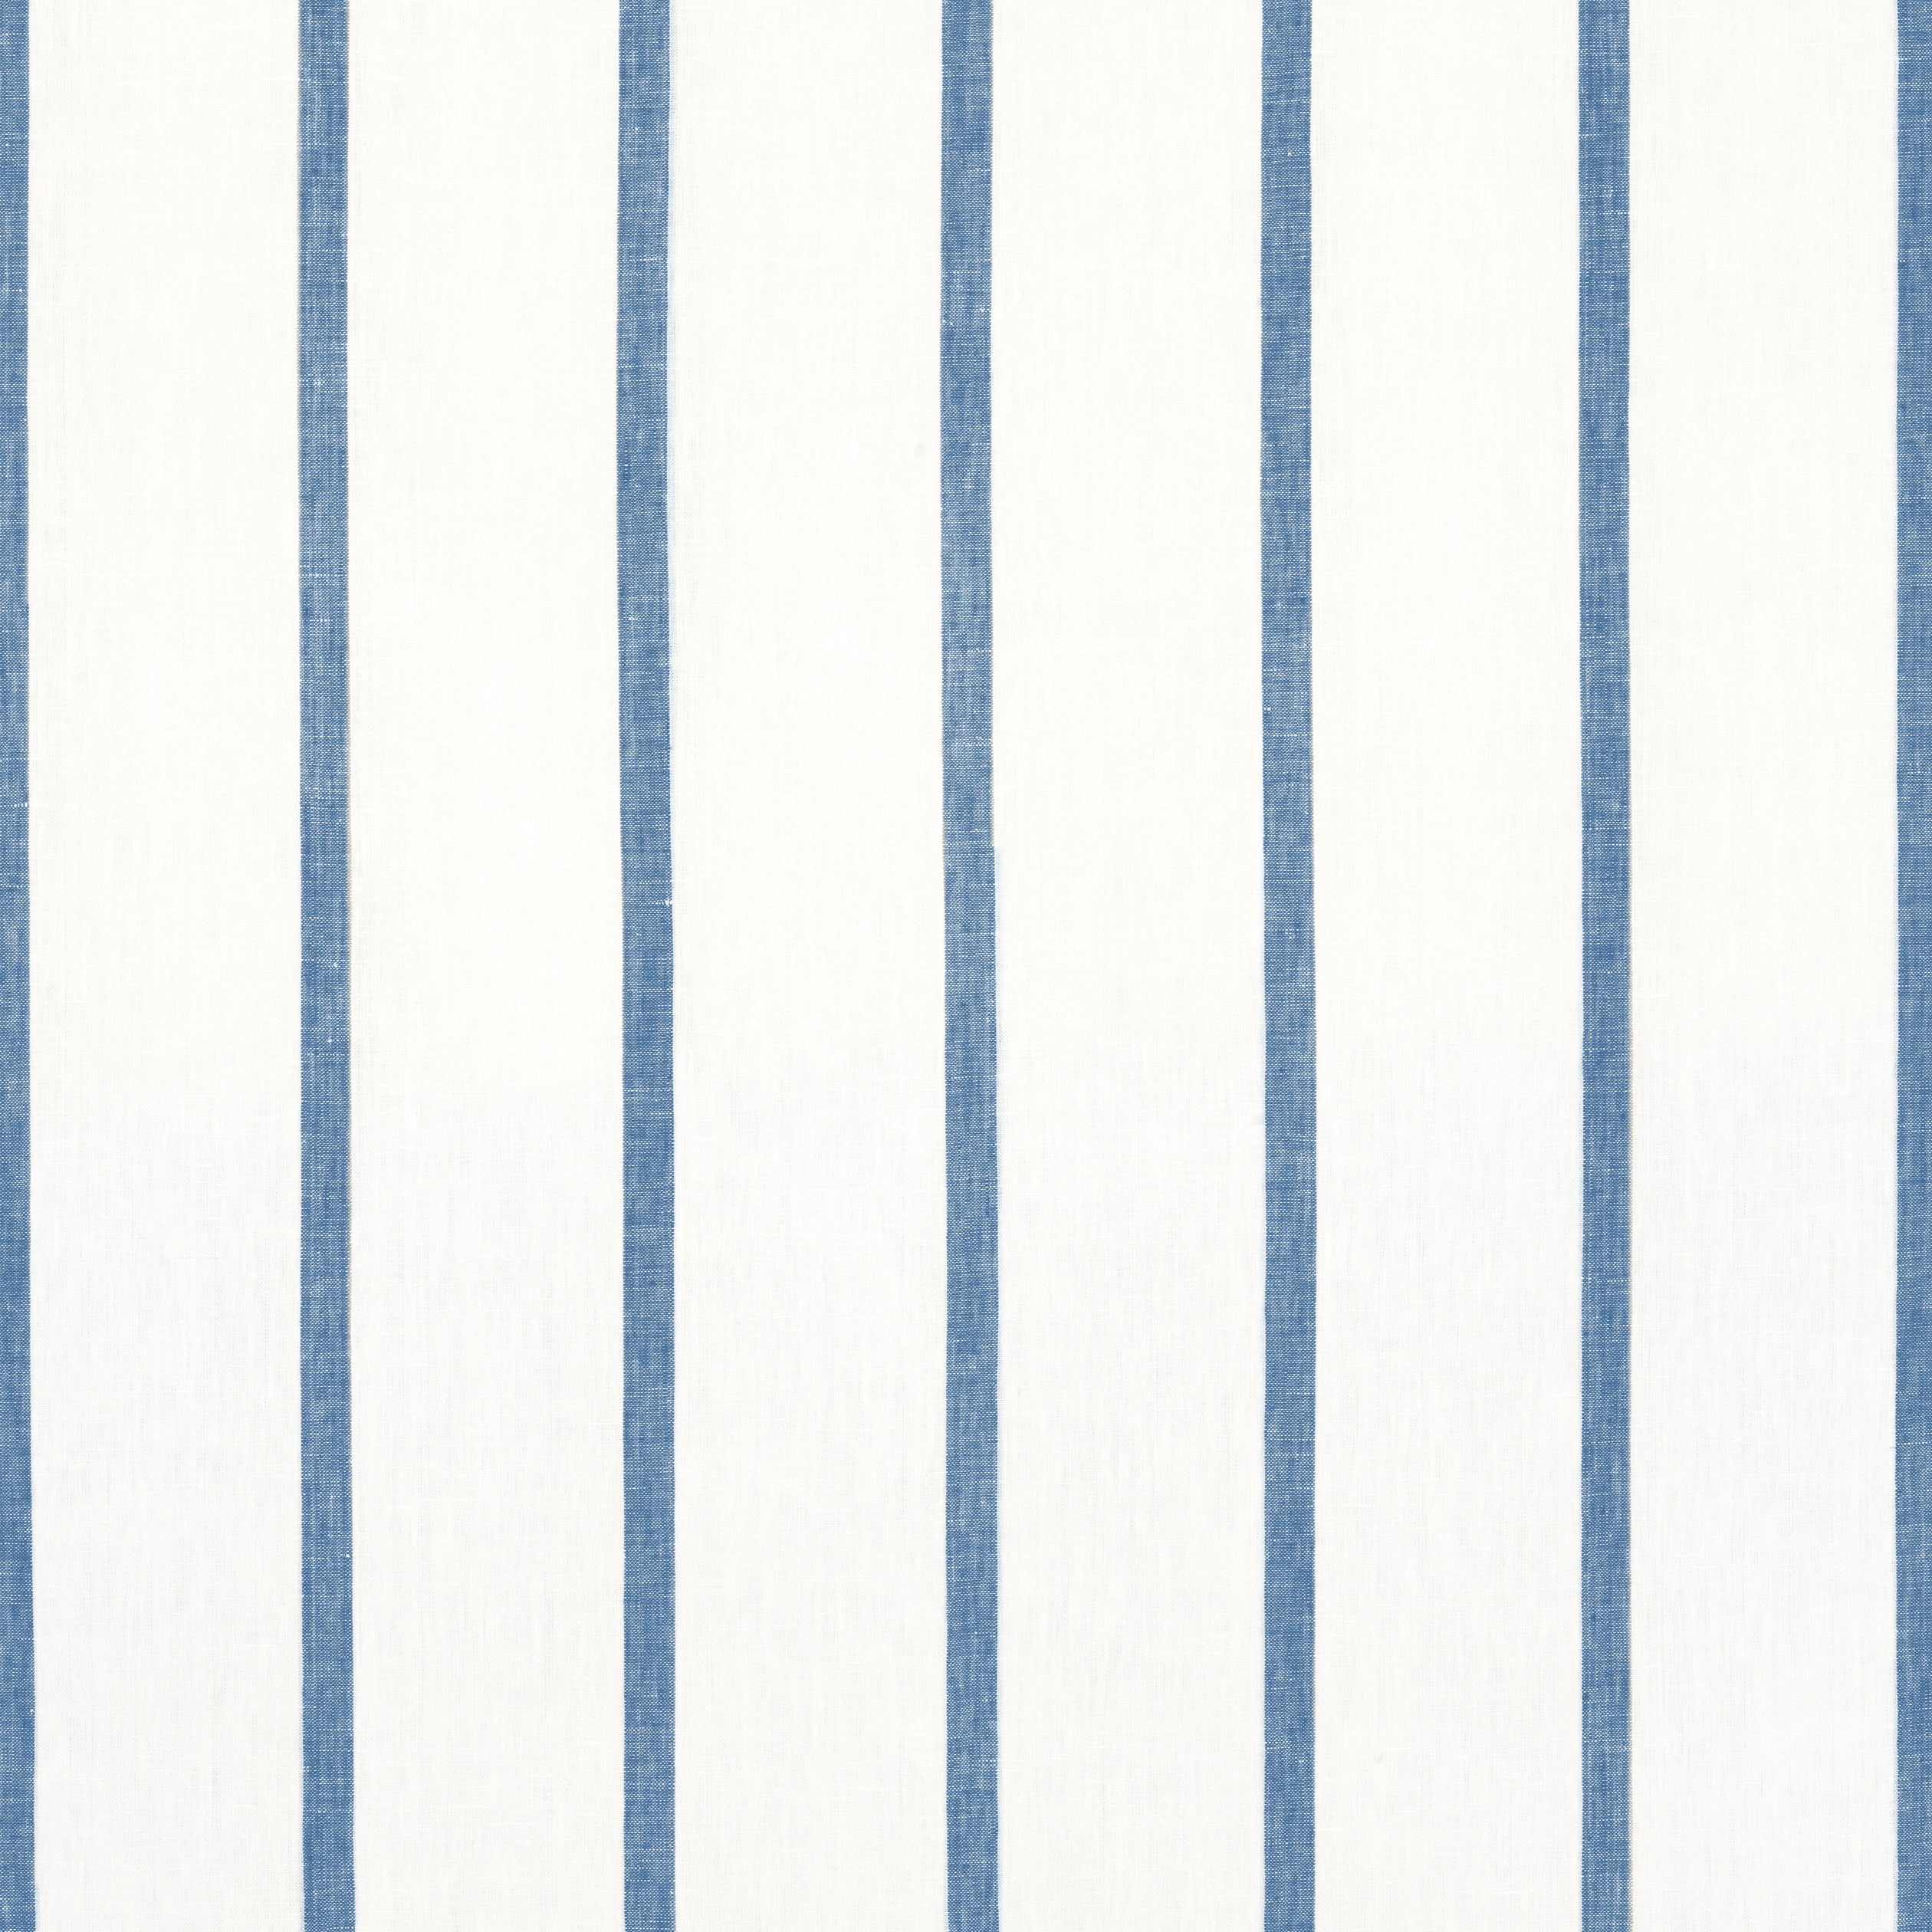 Sailing Stripe fabric in navy and white color - pattern number AW15131 - by Anna French in the Antilles collection